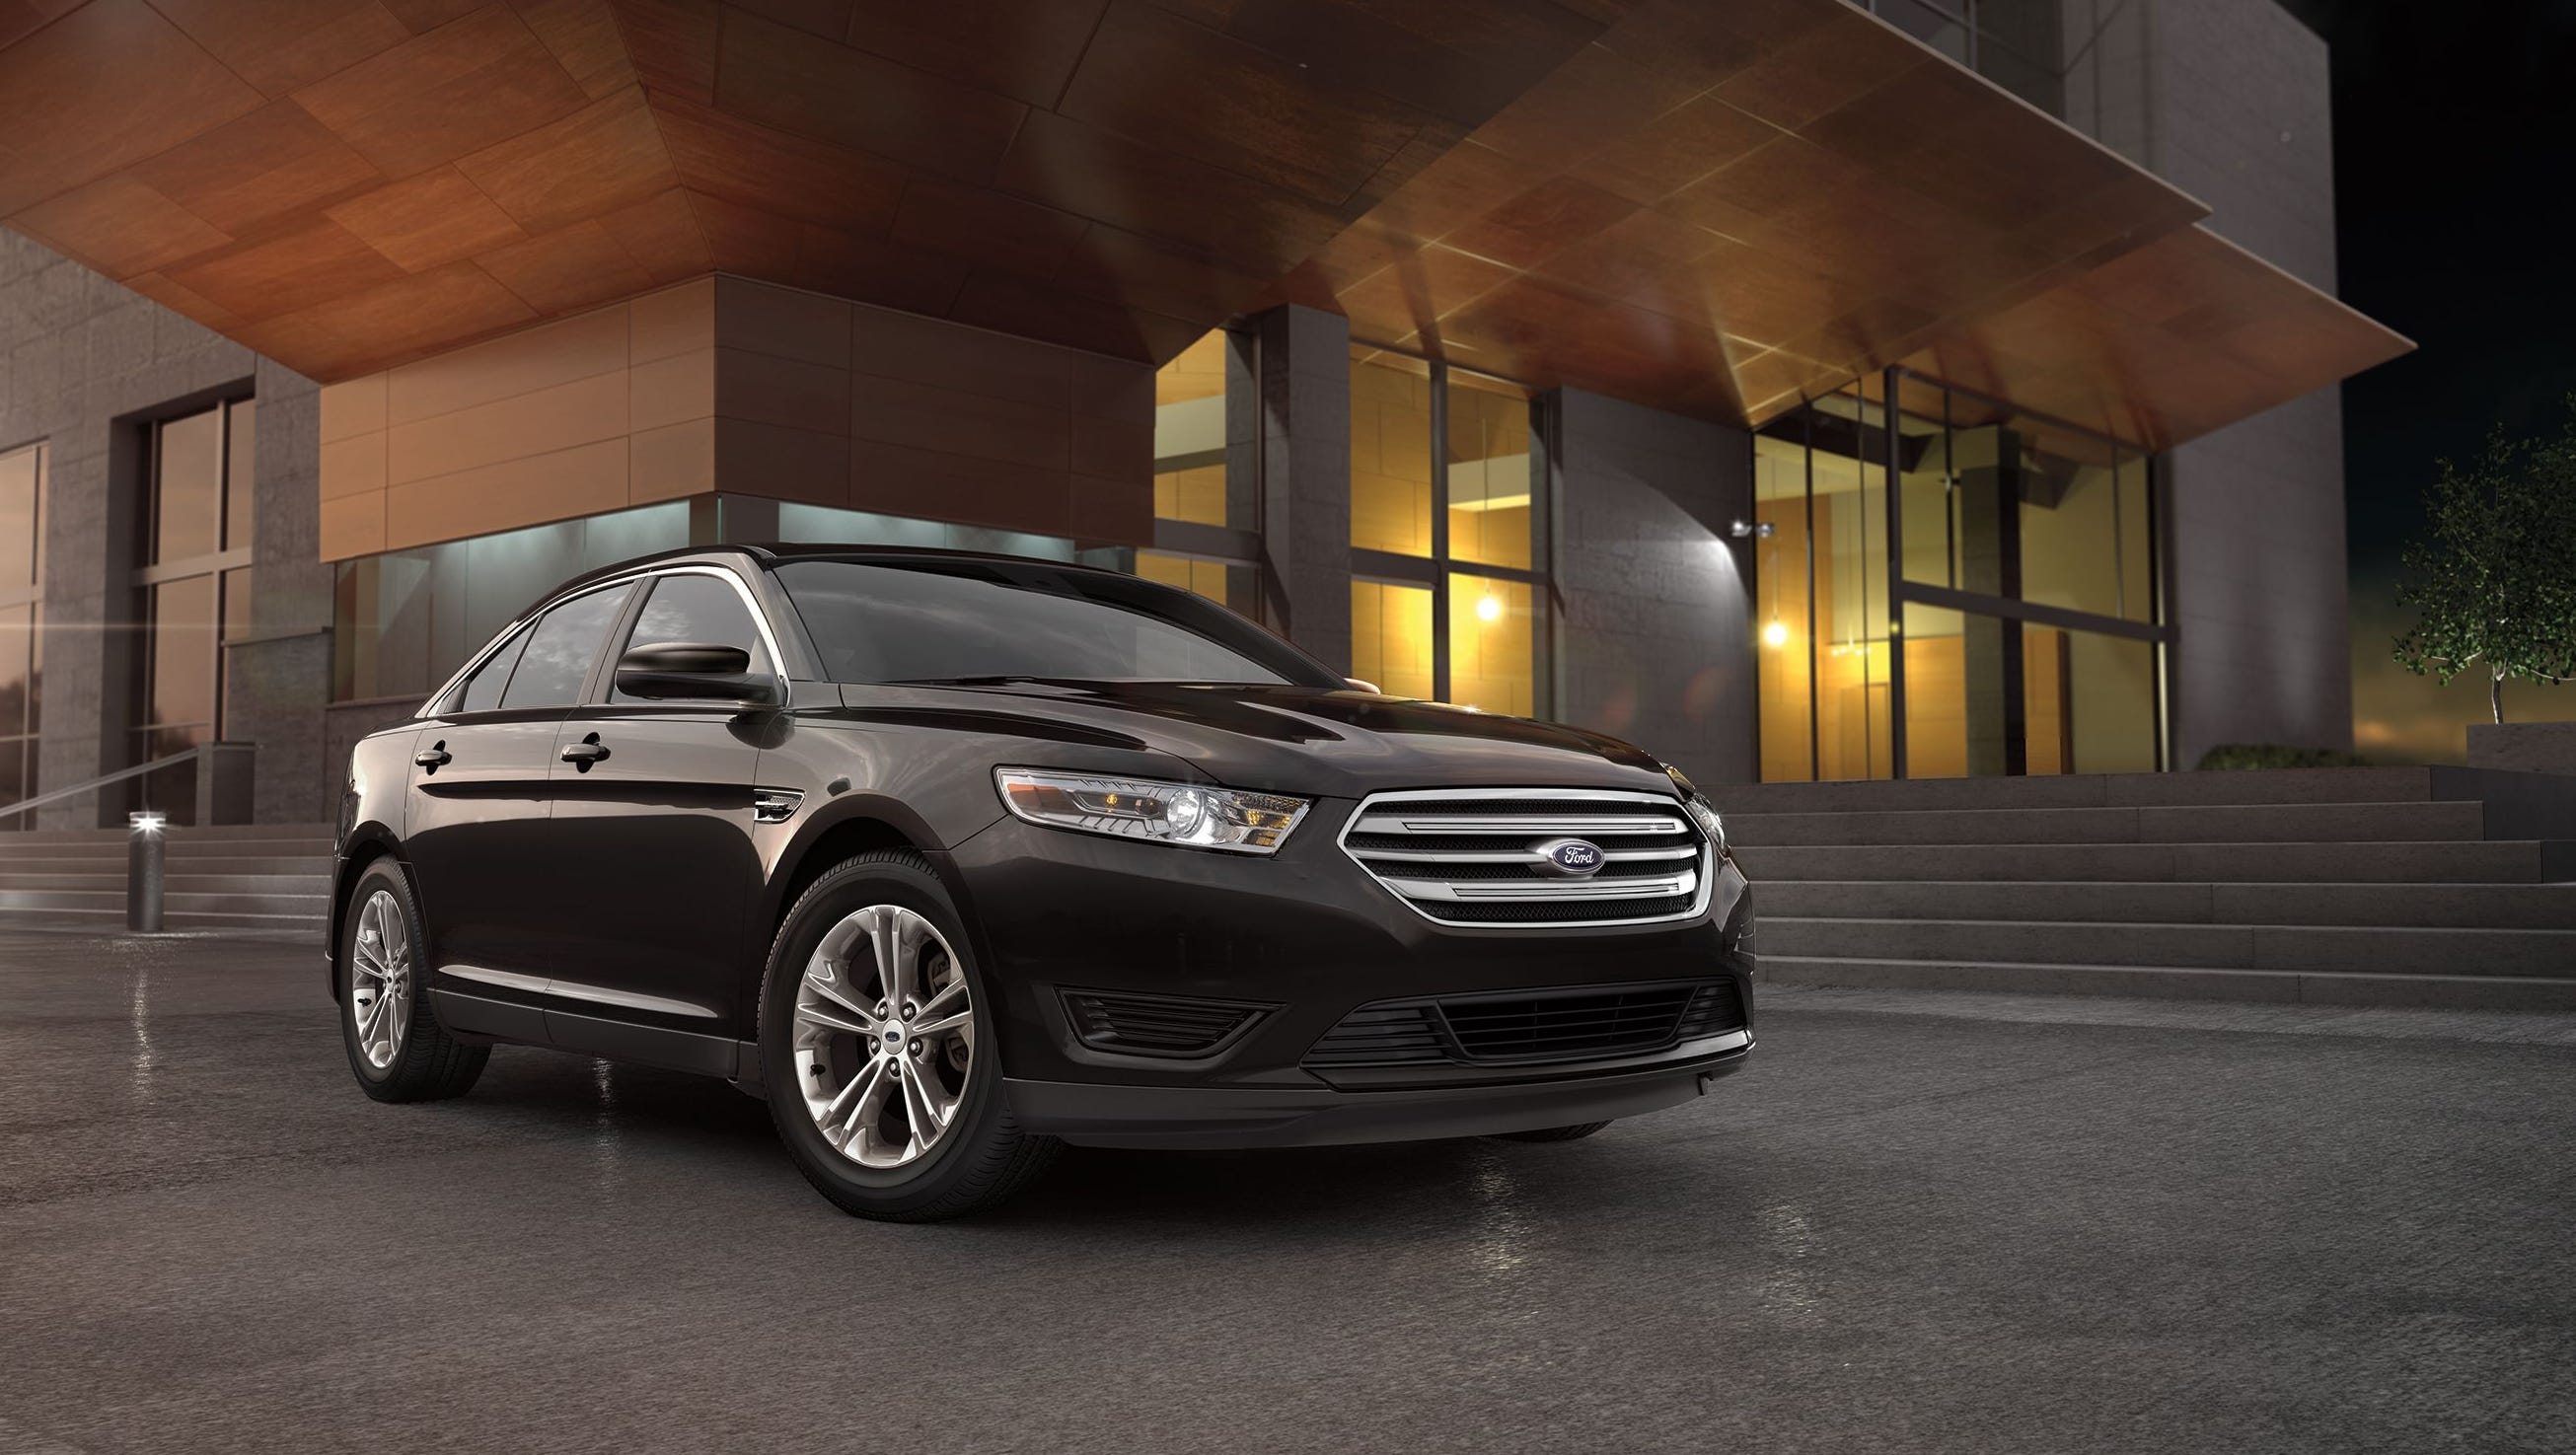 Ford kills Taurus as cars lose out to popular SUVs